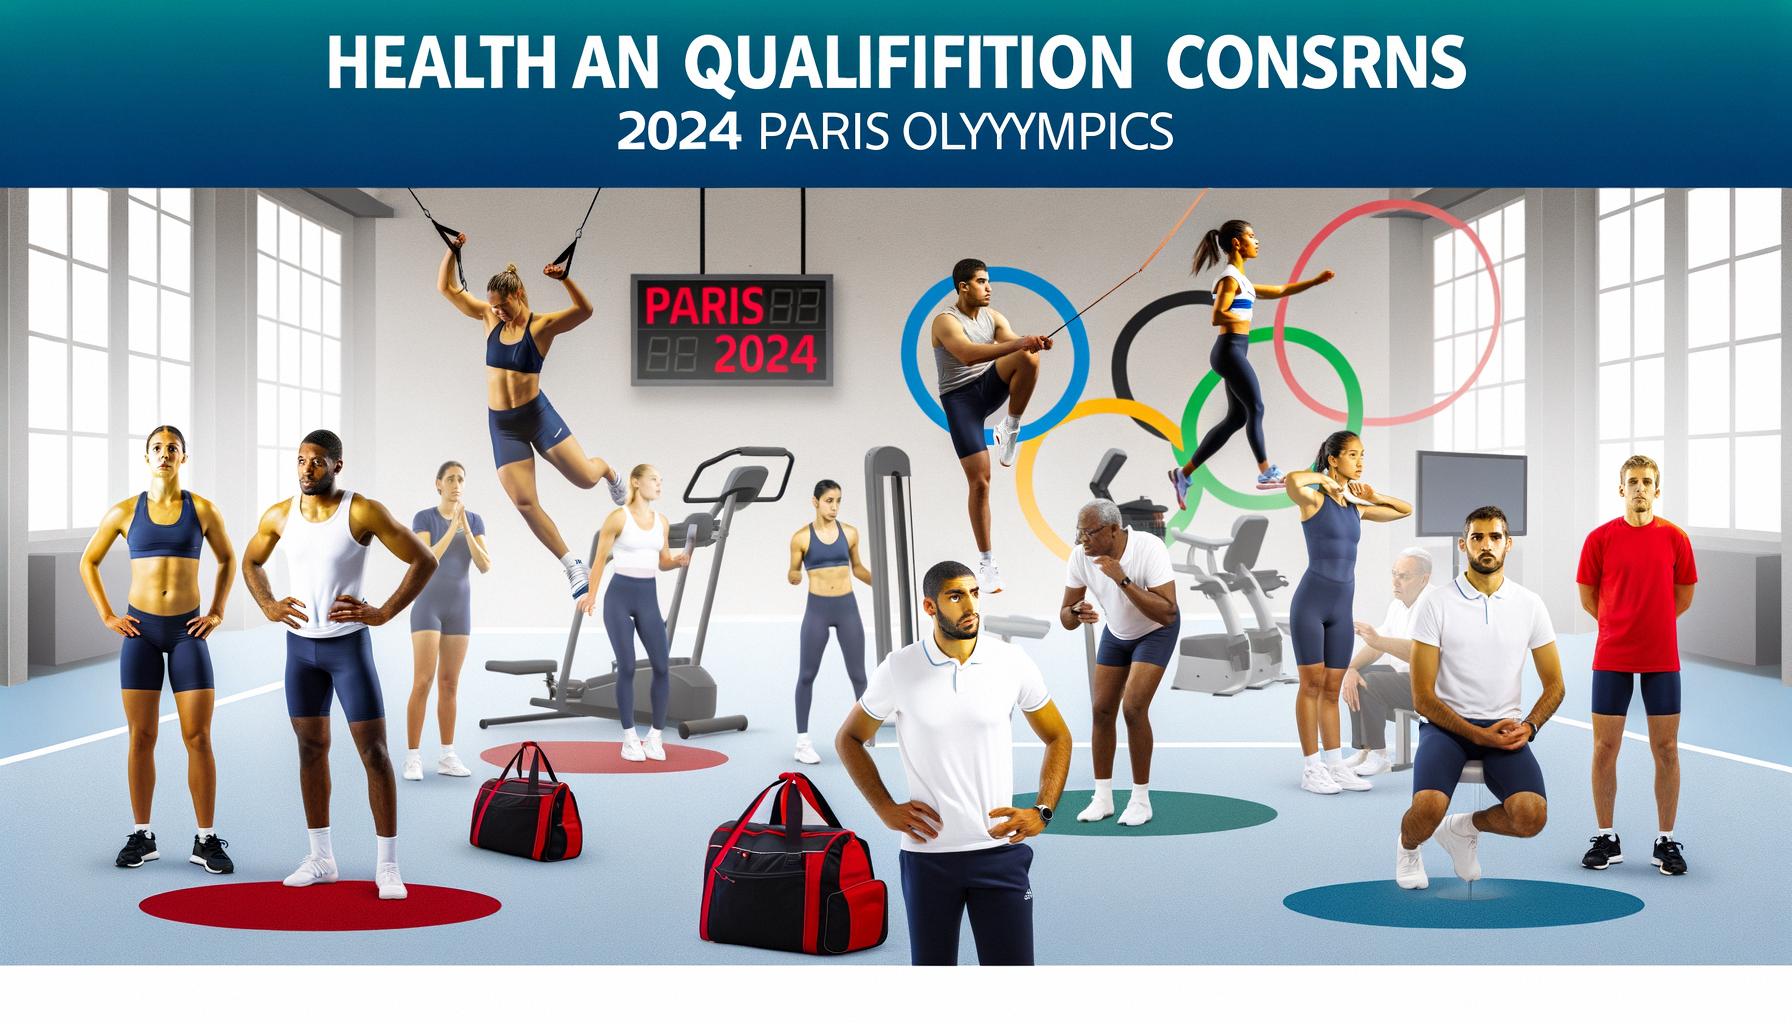 Health and qualification concerns for athletes set to compete in Paris 2024.